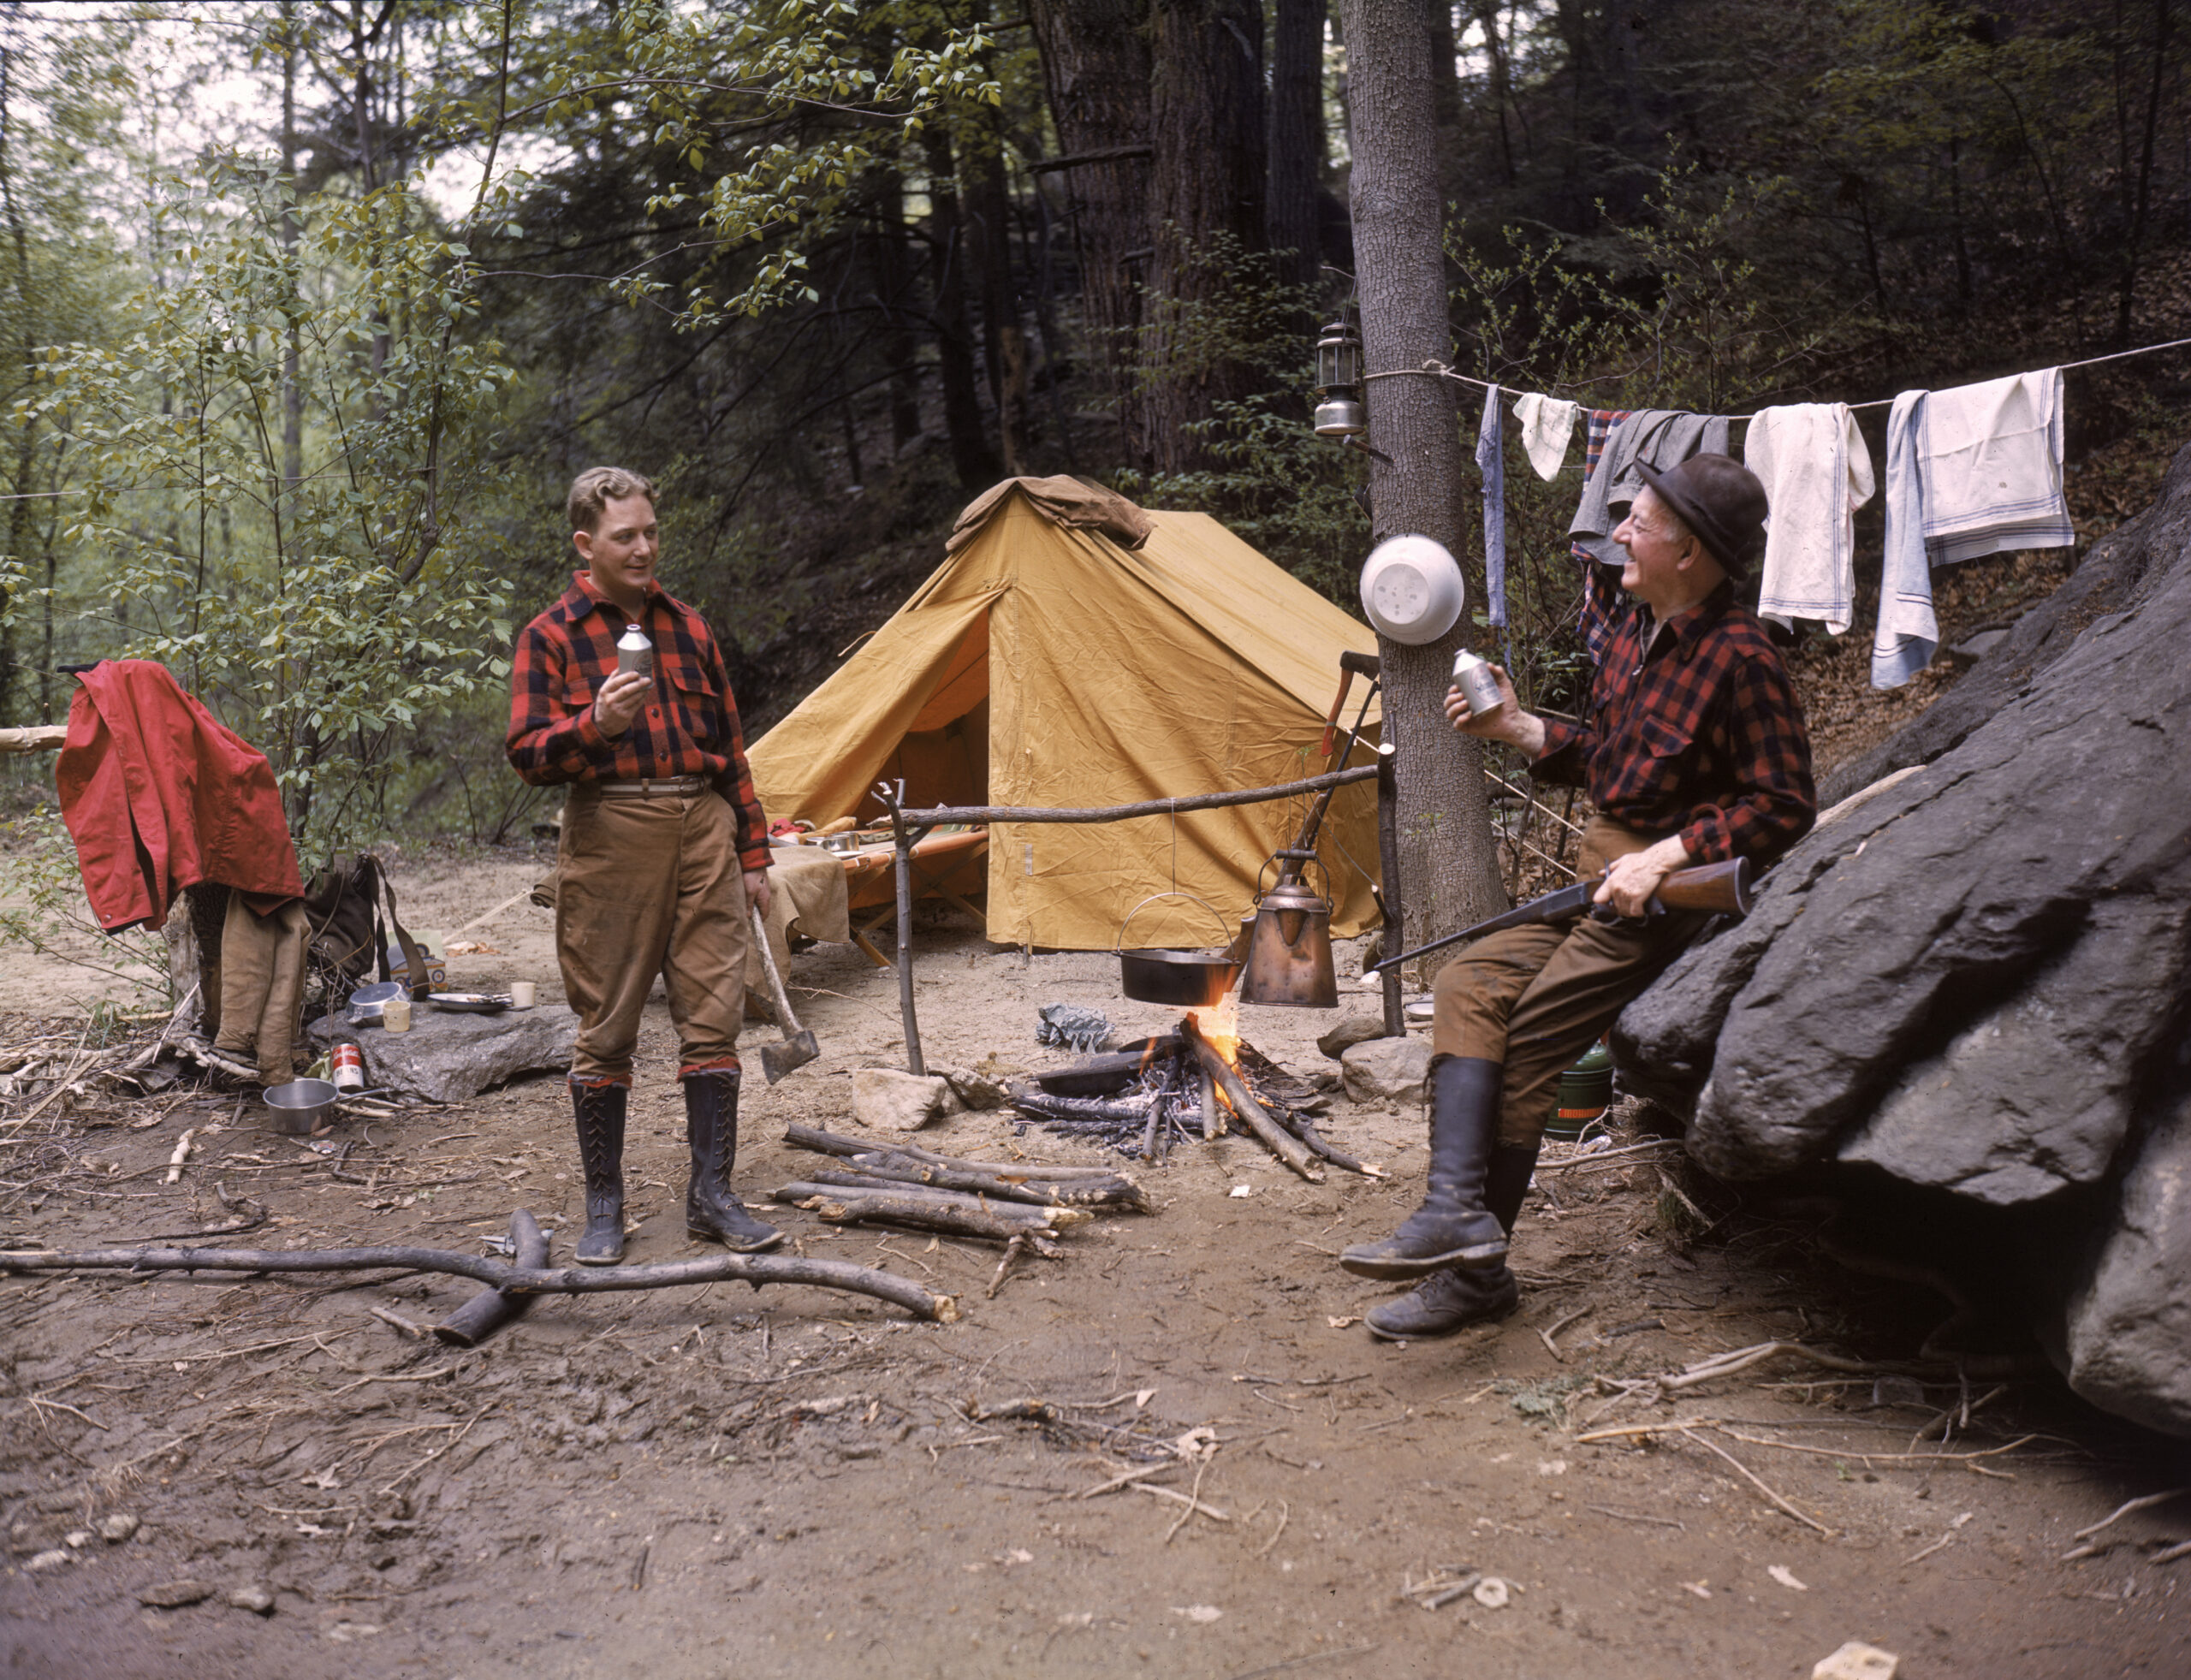 Two hunters in red plaid shirts drink beer in front of a wall tent camp.